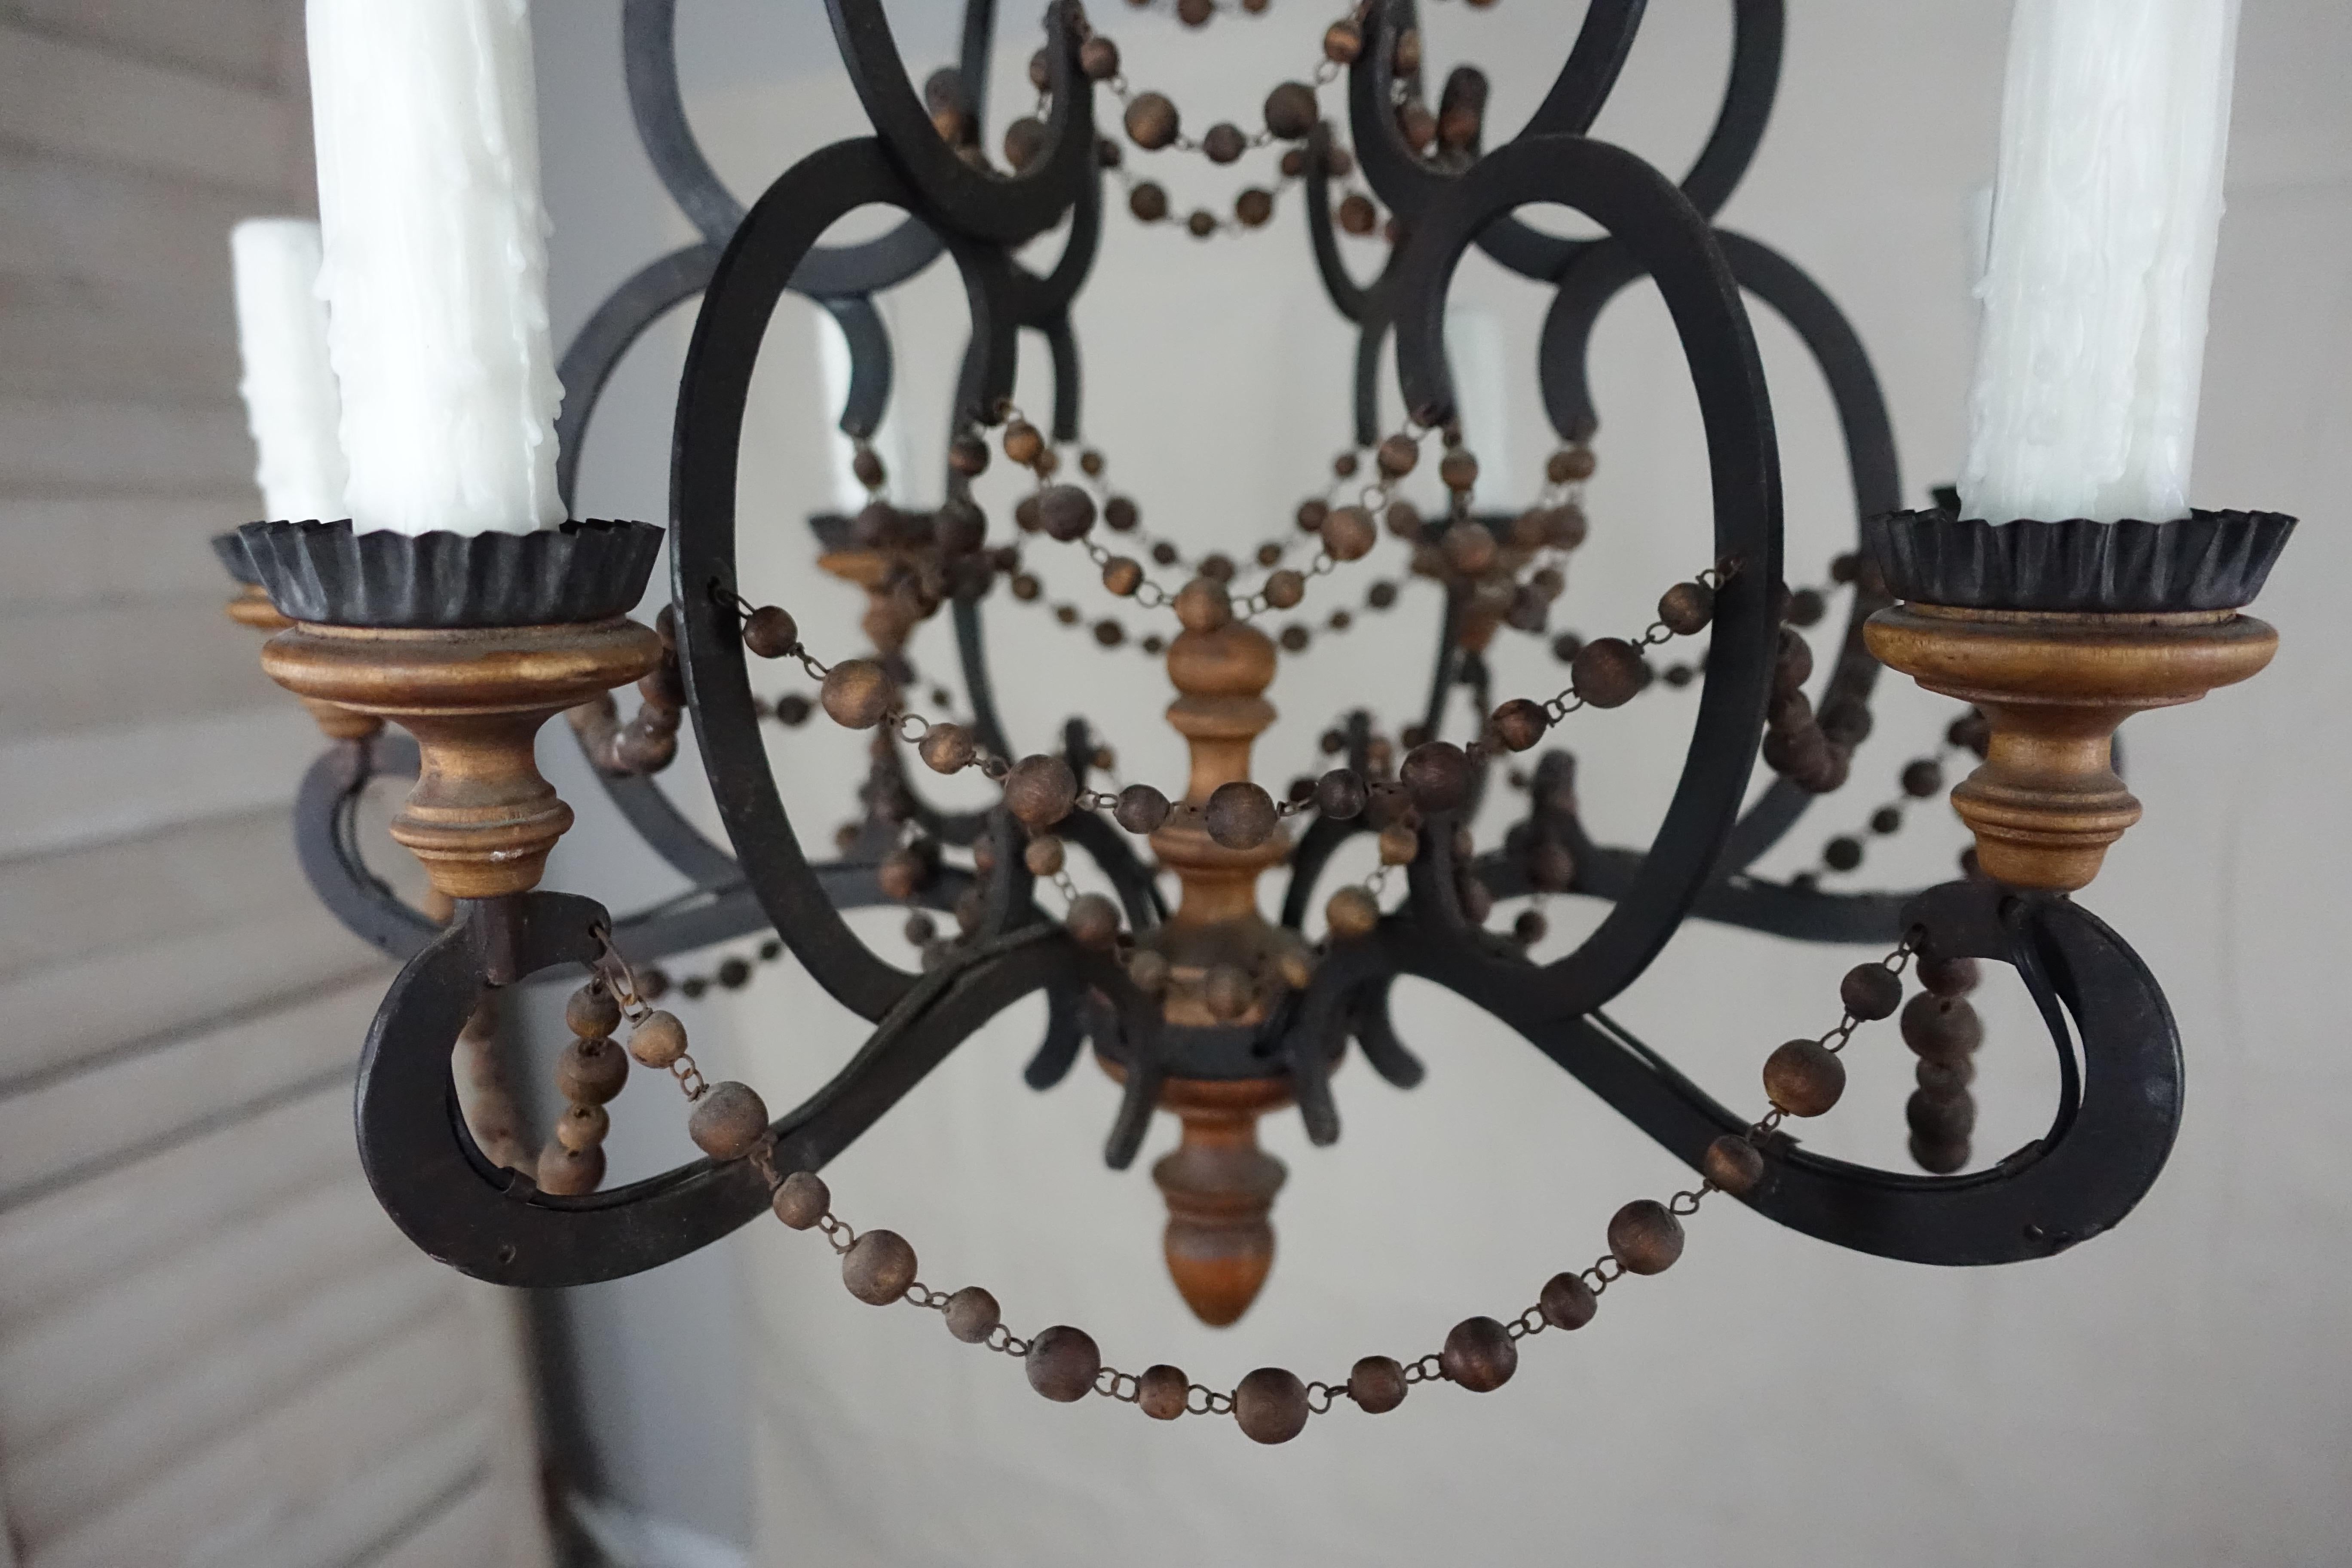 Spanish wrought iron and wood beaded chandelier with iron and wood frame. The 6-light fixture has garlands of natural colored wood beads throughout. Wood bobeches and centre finial. The fixture has been newly wired with drip wax candle covers and